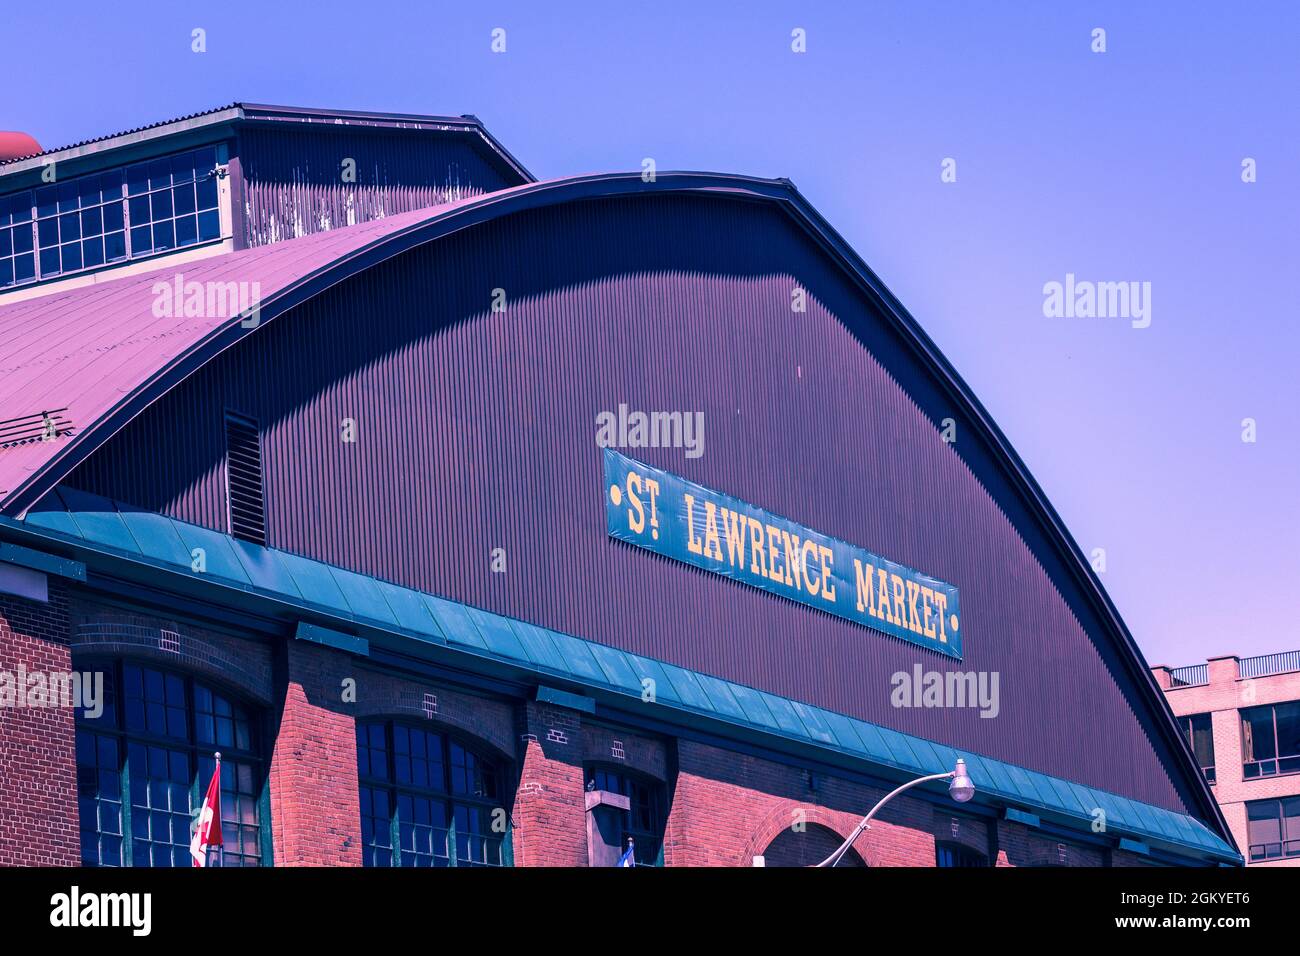 Saint Lawrence Market in Toronto, Canada. The famous place is considered one of the best food markets in the world. The image shows the exterior archi Stock Photo